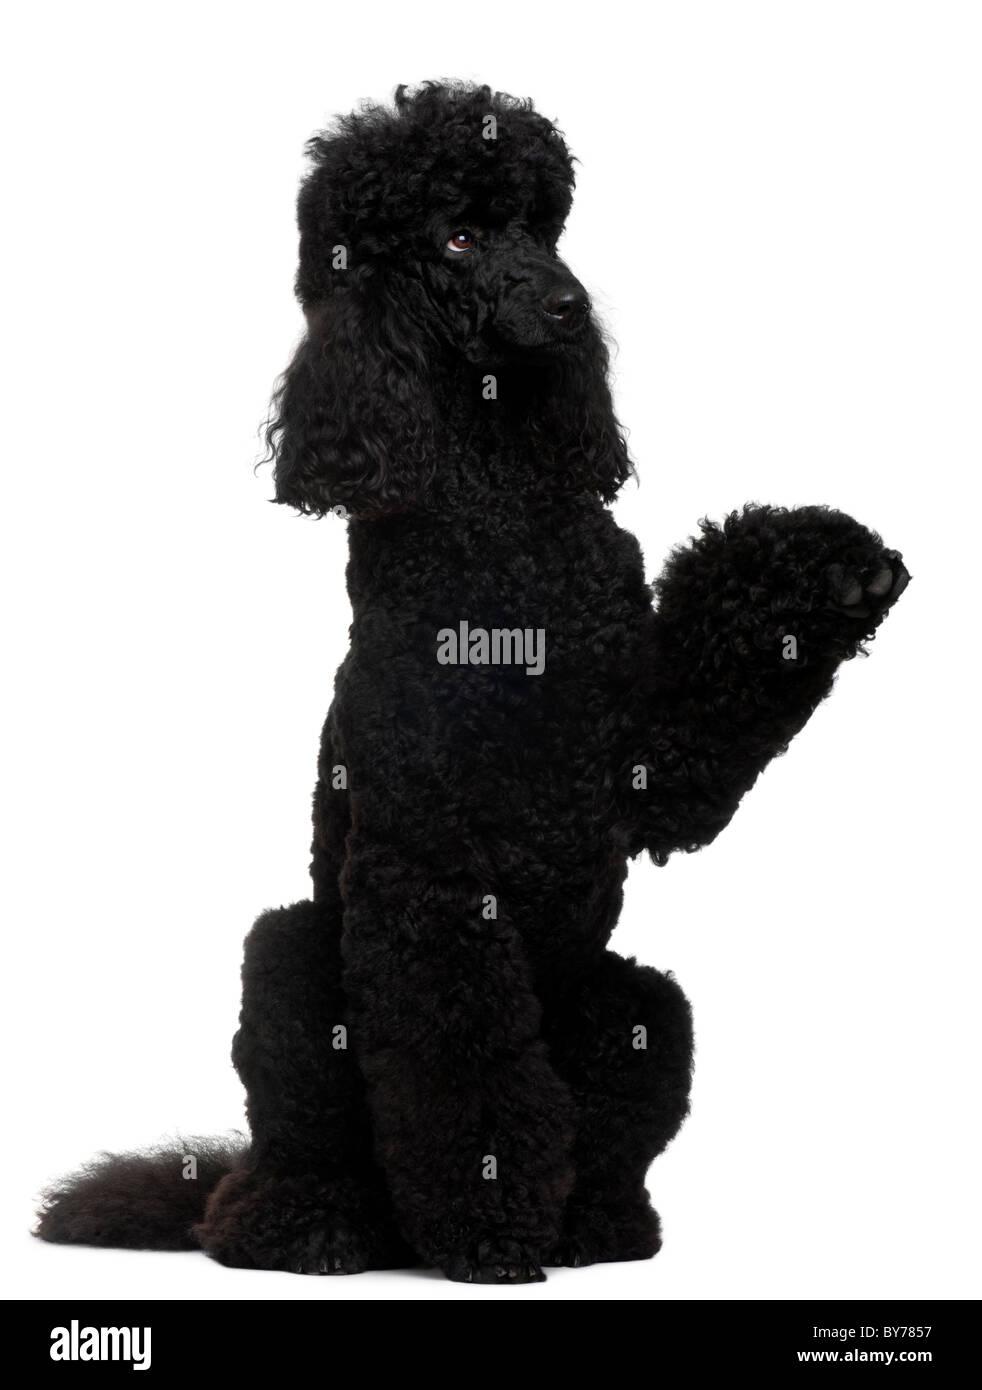 Royal Poodle, 18 months old, standing on hind legs in front of white background Stock Photo